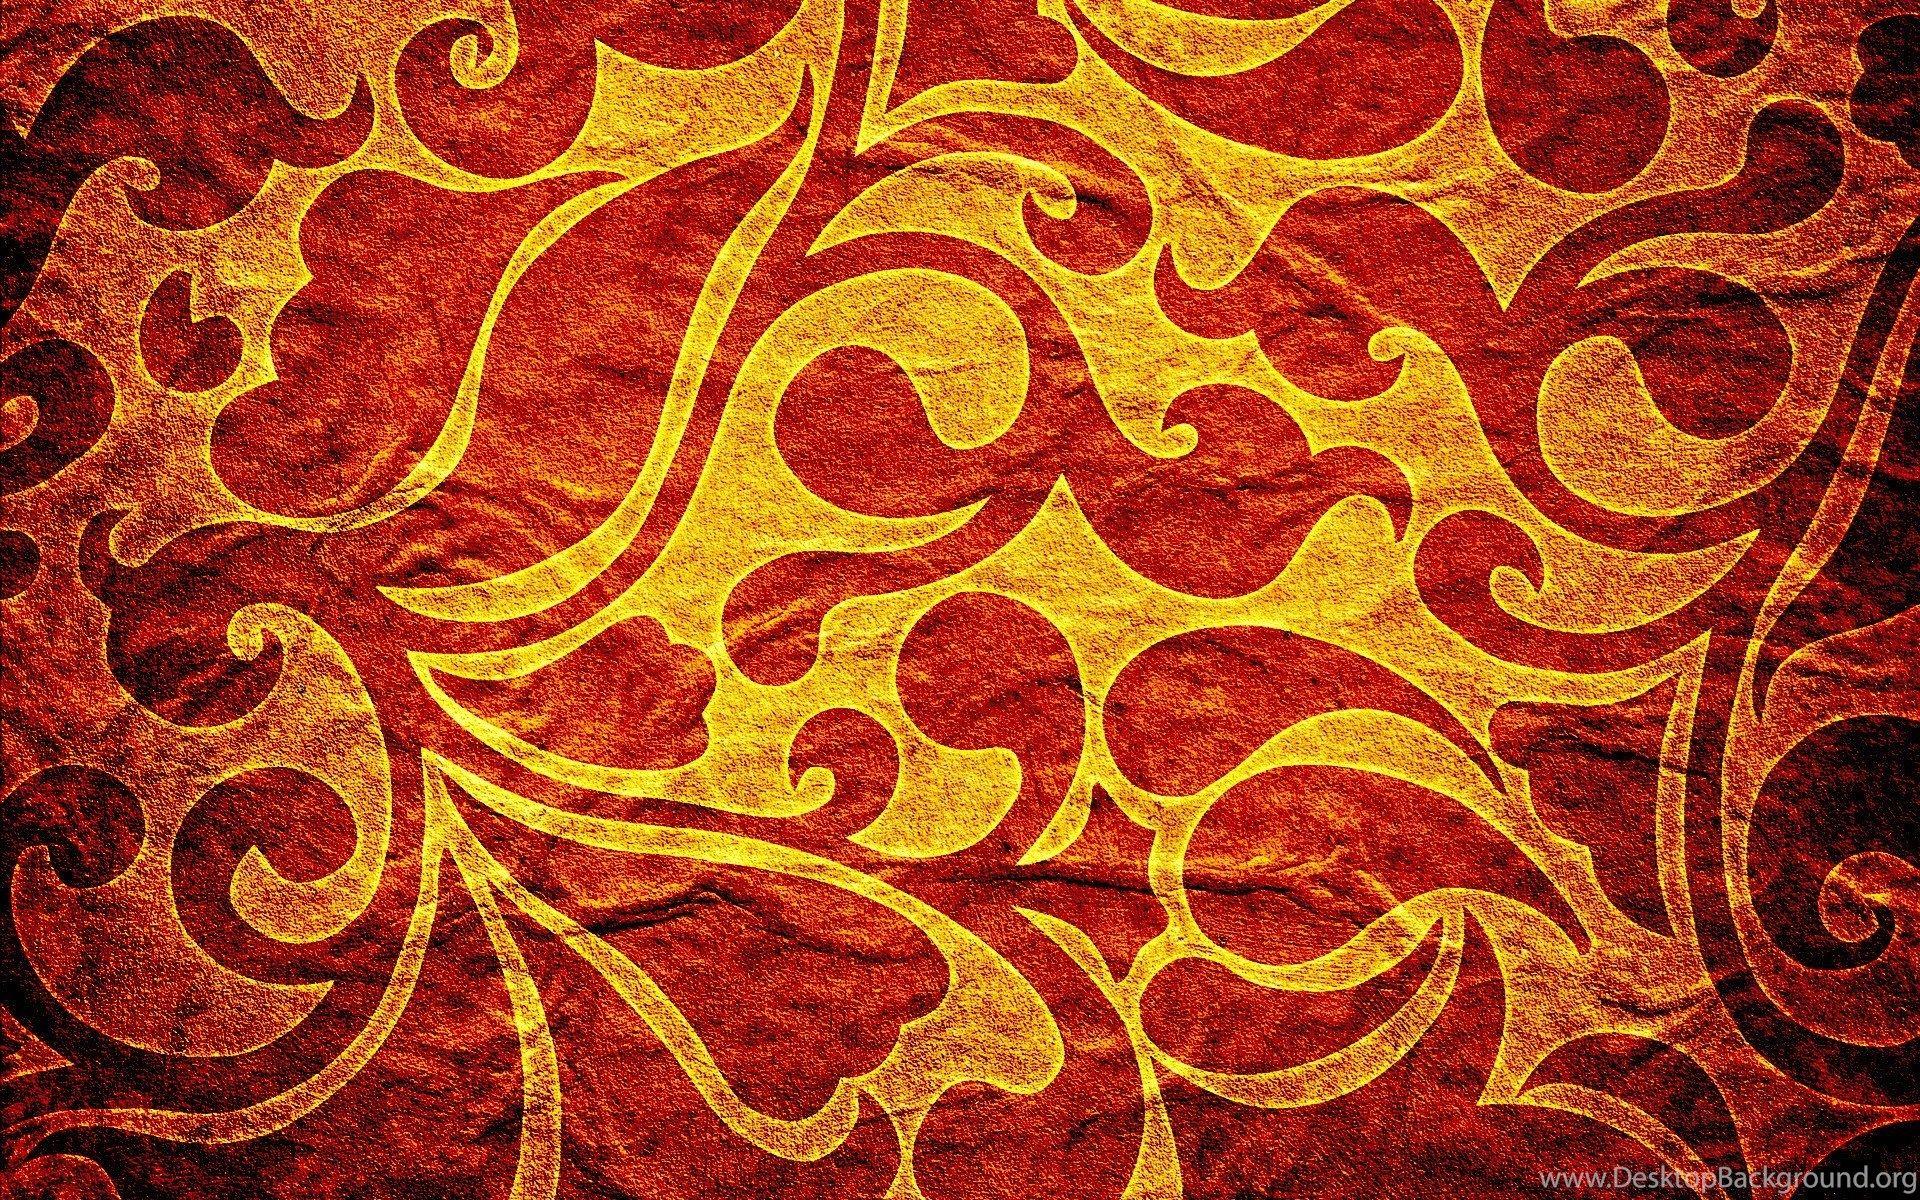 Red and Gold Wallpapers - Top Free Red and Gold Backgrounds